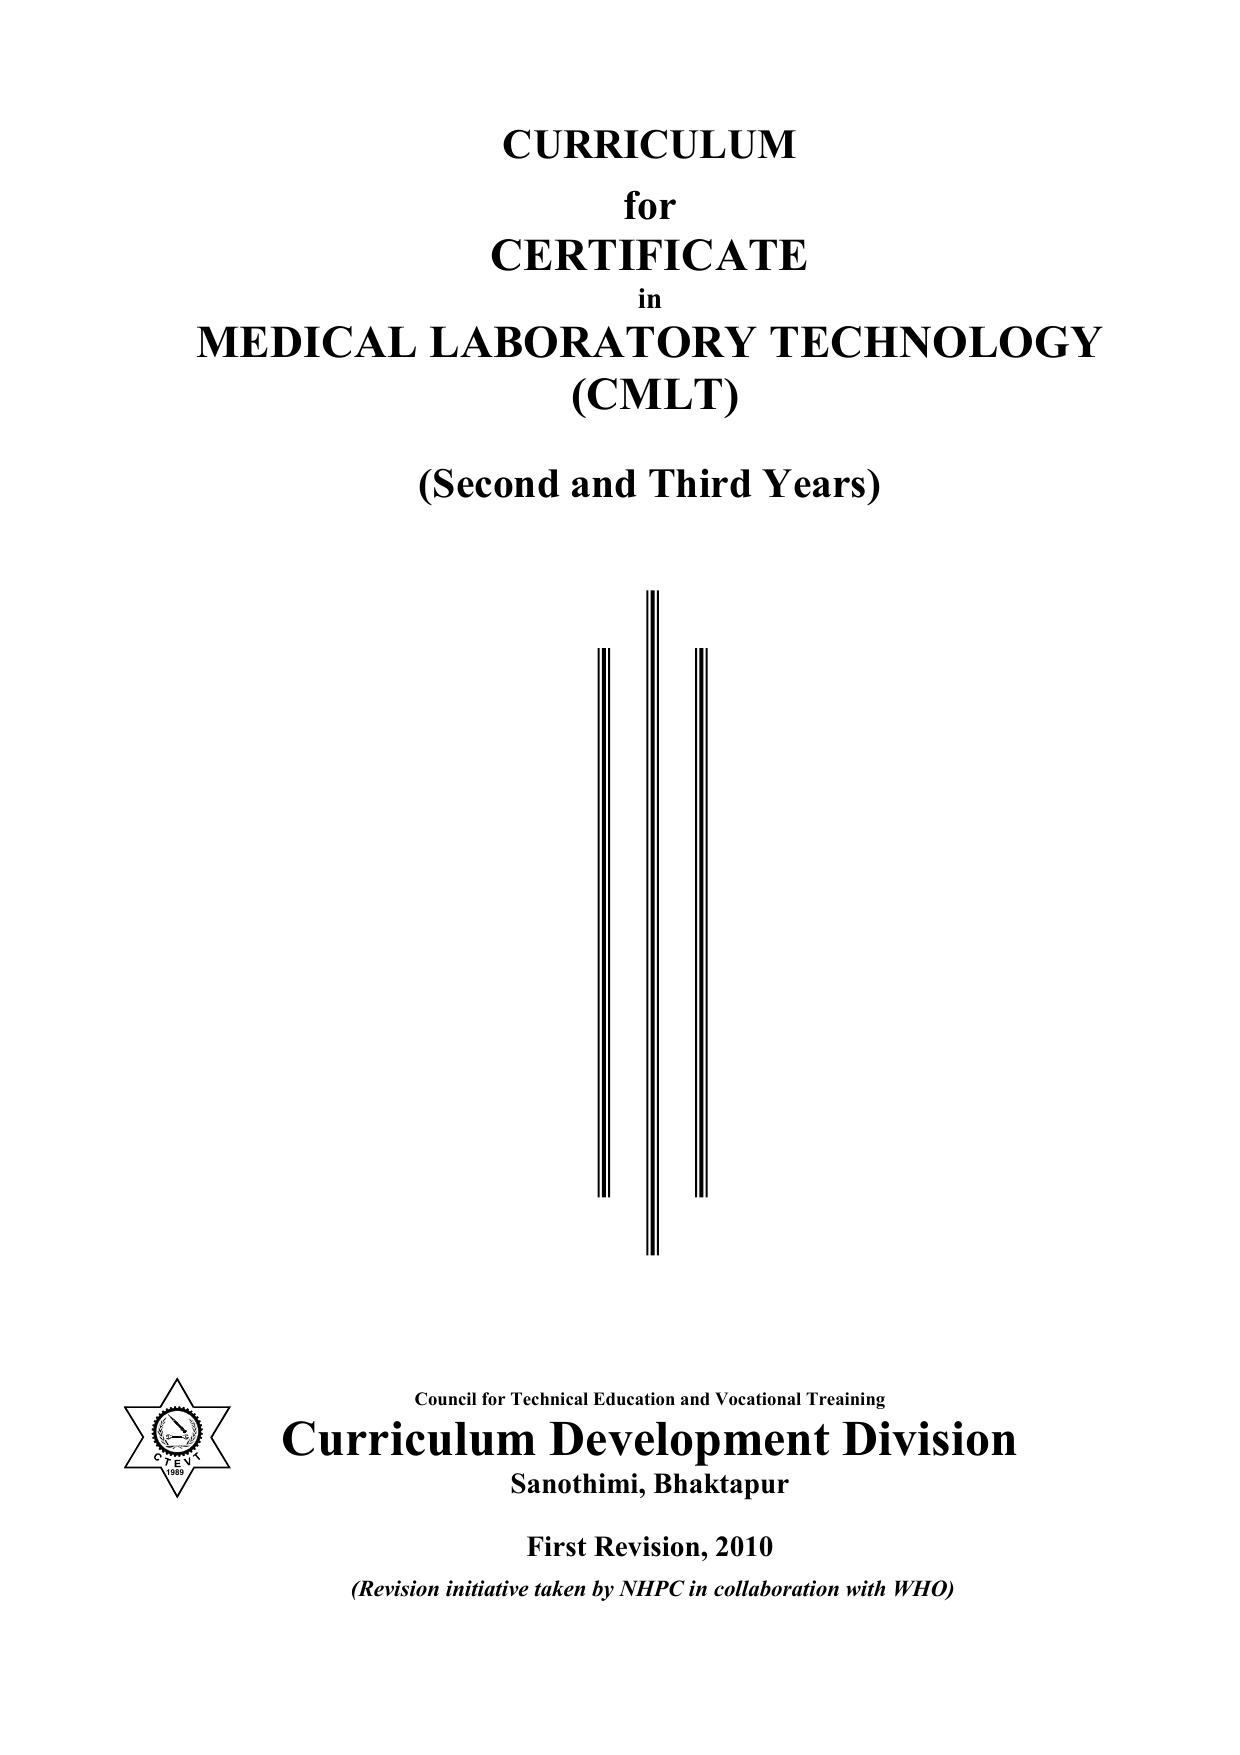 Certificate in Medical Laboratory Technology (CMLT), 2010